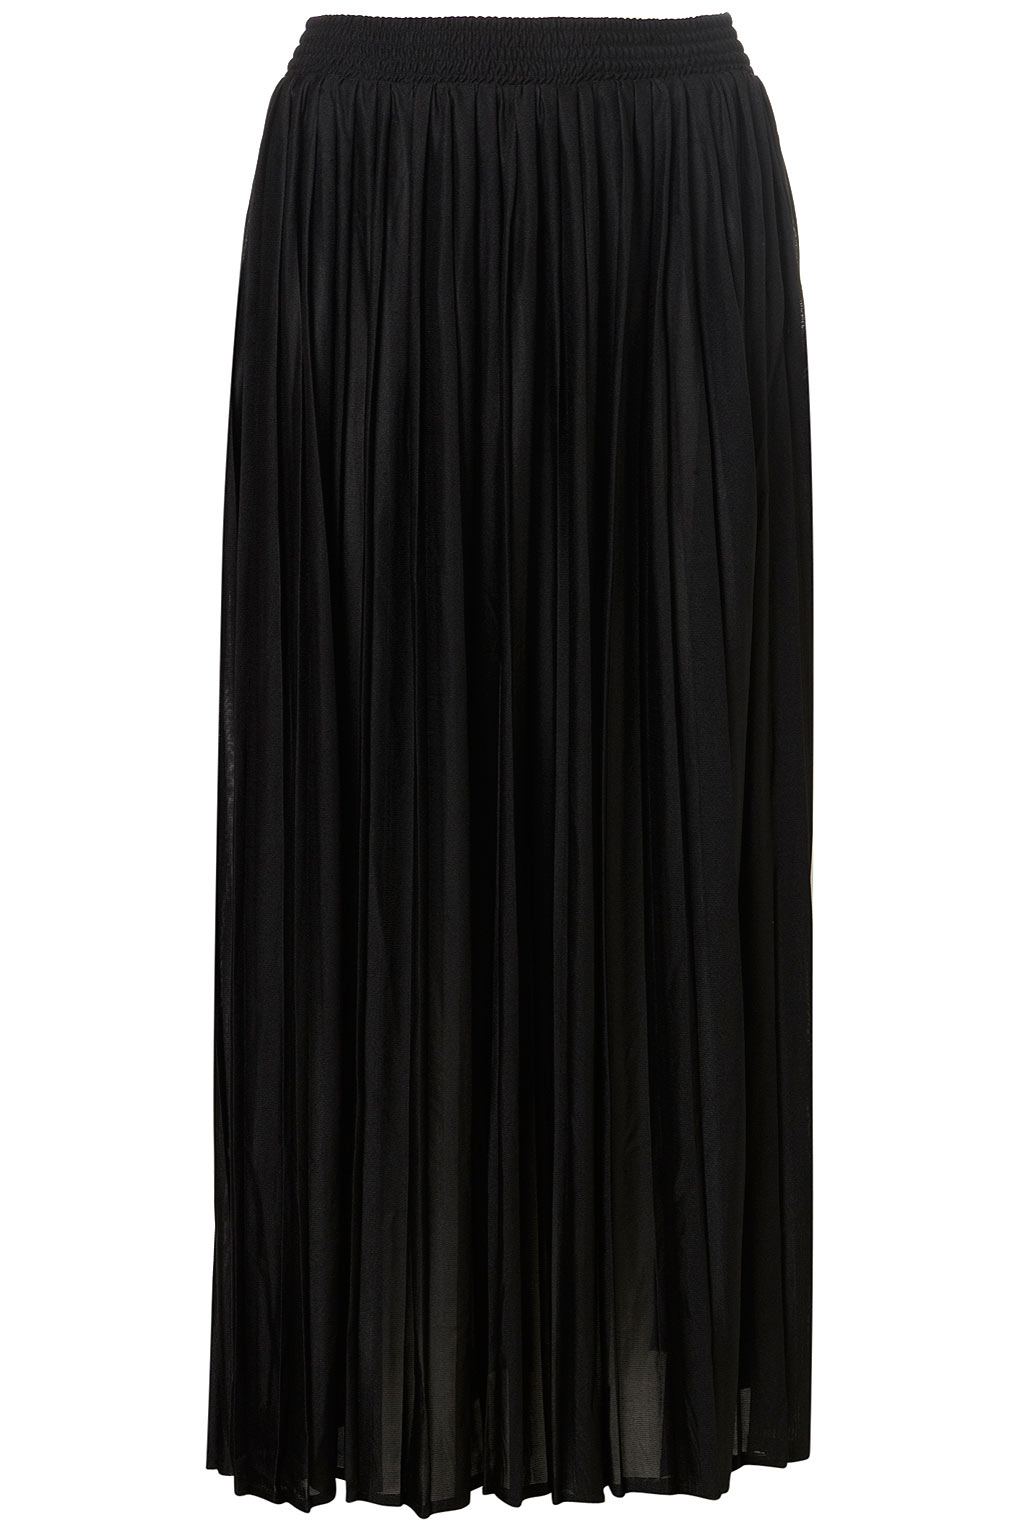 PlumesdePaon: Top Trends for Spring 2012 Series: Pleats